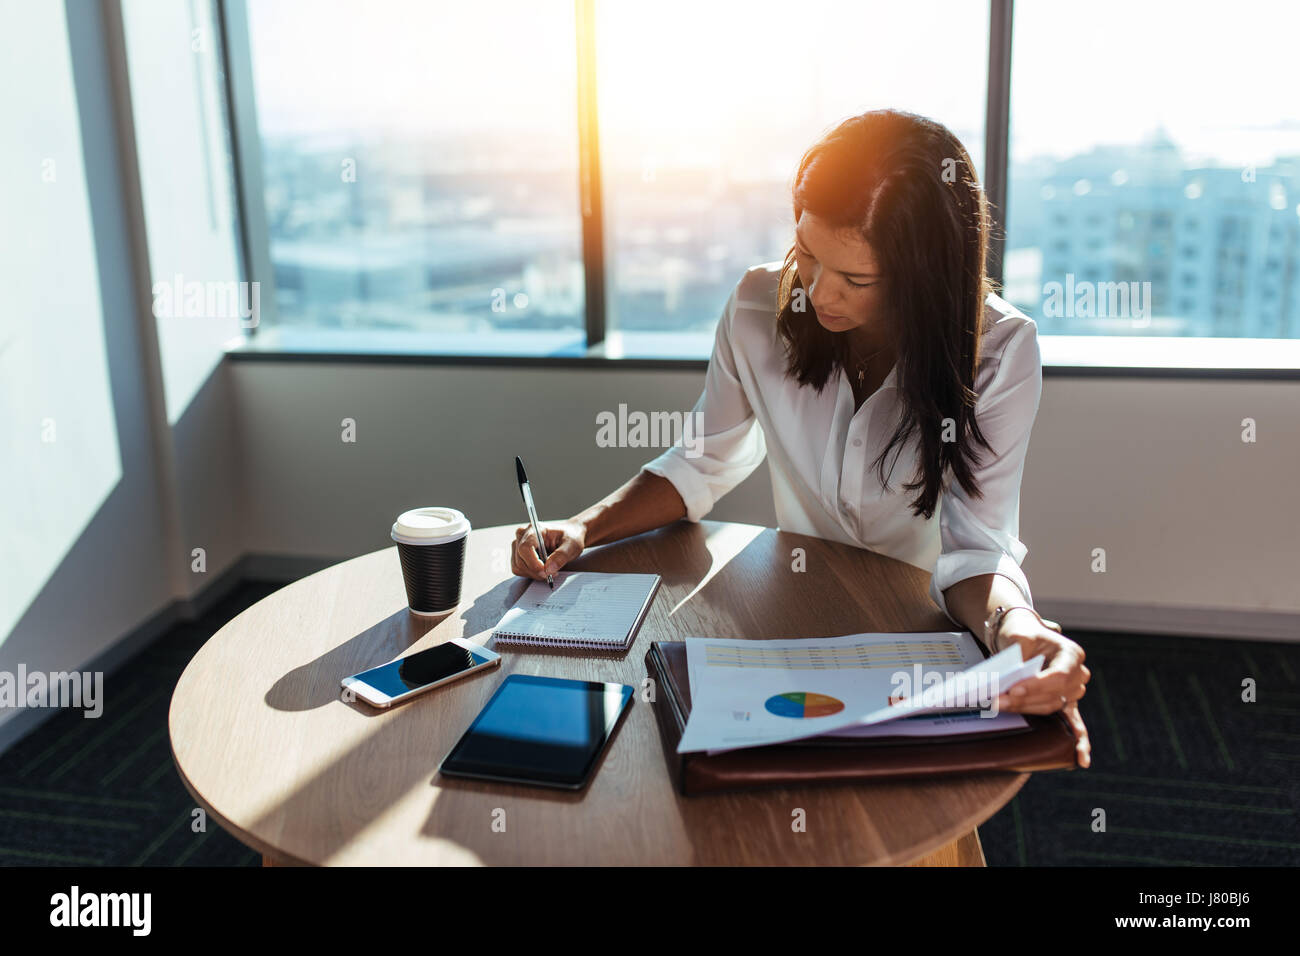 Young woman entrepreneur making business working at coffee table in office. Female business executive making business plans with a coffee cup on her t Stock Photo